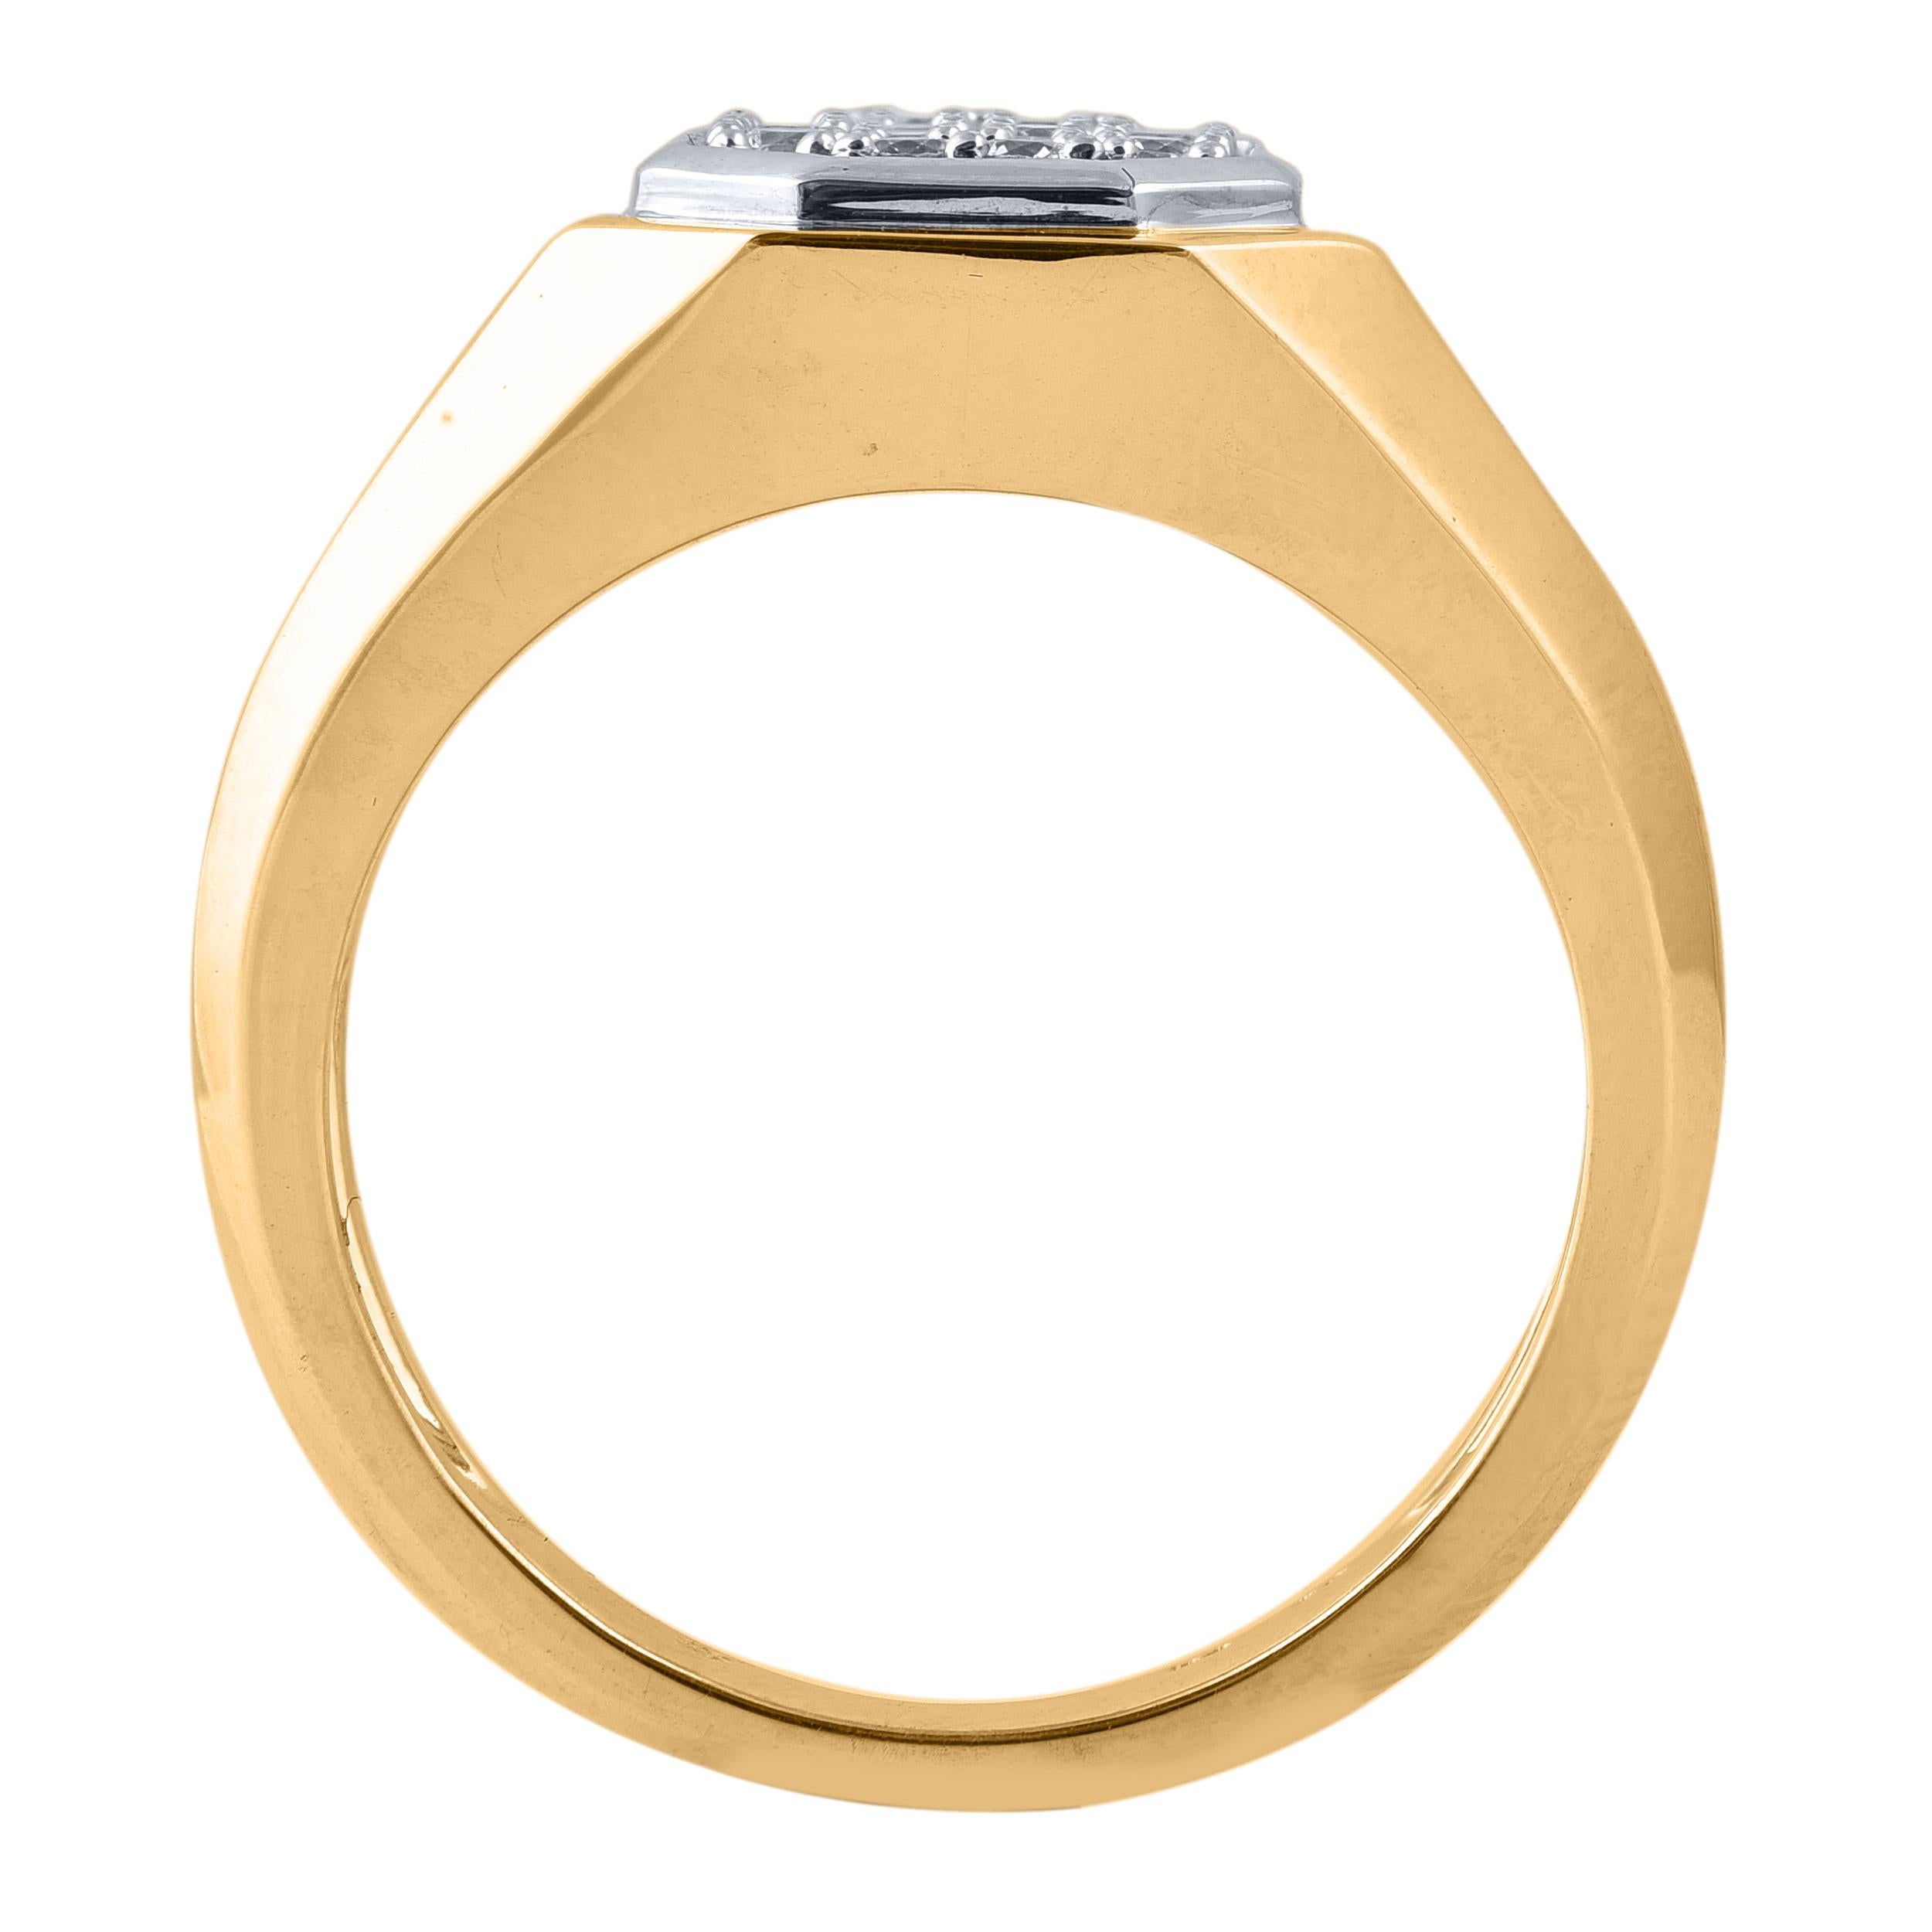 He'll appreciate the timeless look of this wedding band. These band ring are studded with 22 brilliant cut natural diamonds in pave setting in 18KT yellow gold. The white diamonds are graded as H-I color and I-2 clarity.